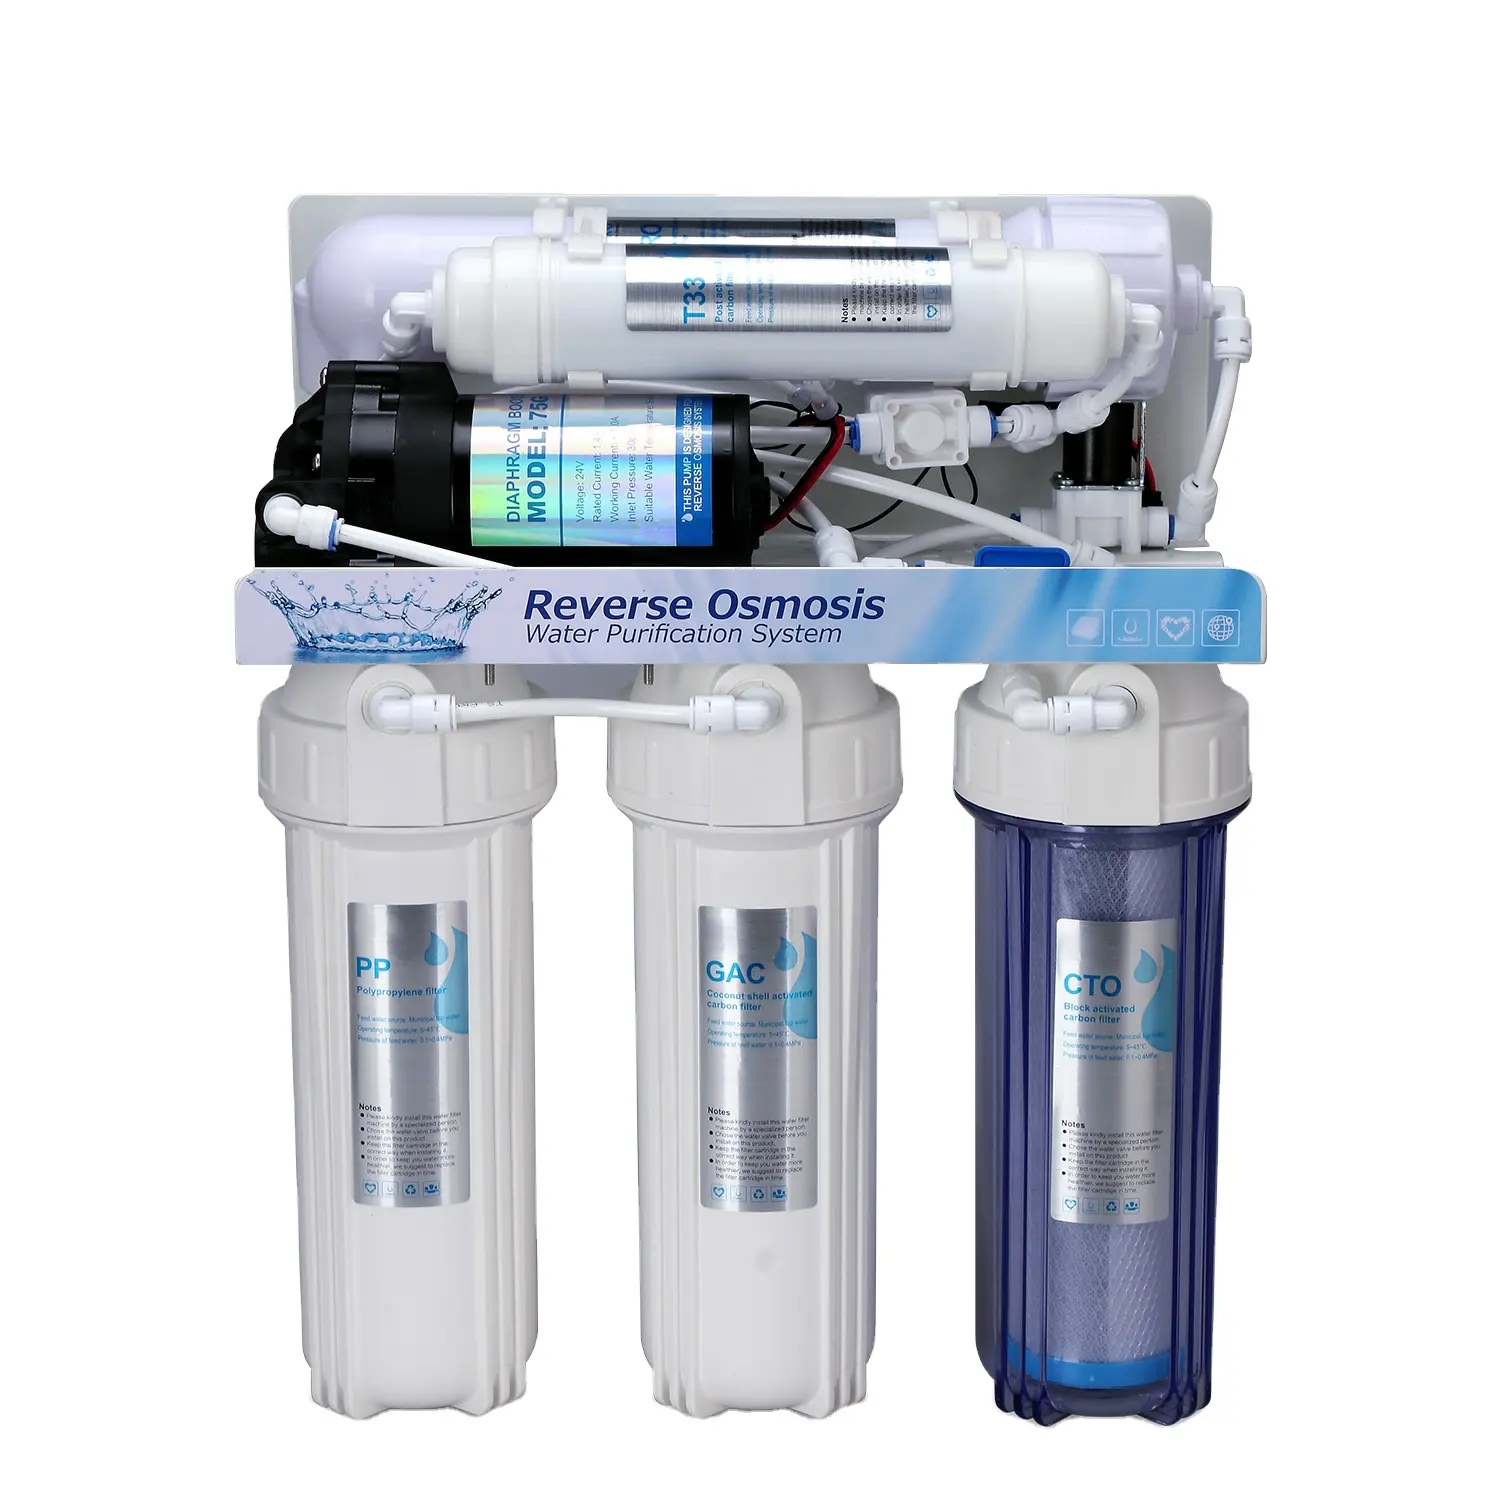 japan kangen ro water filter pump Best Selling in US Reverse Osmosis Water Purification System